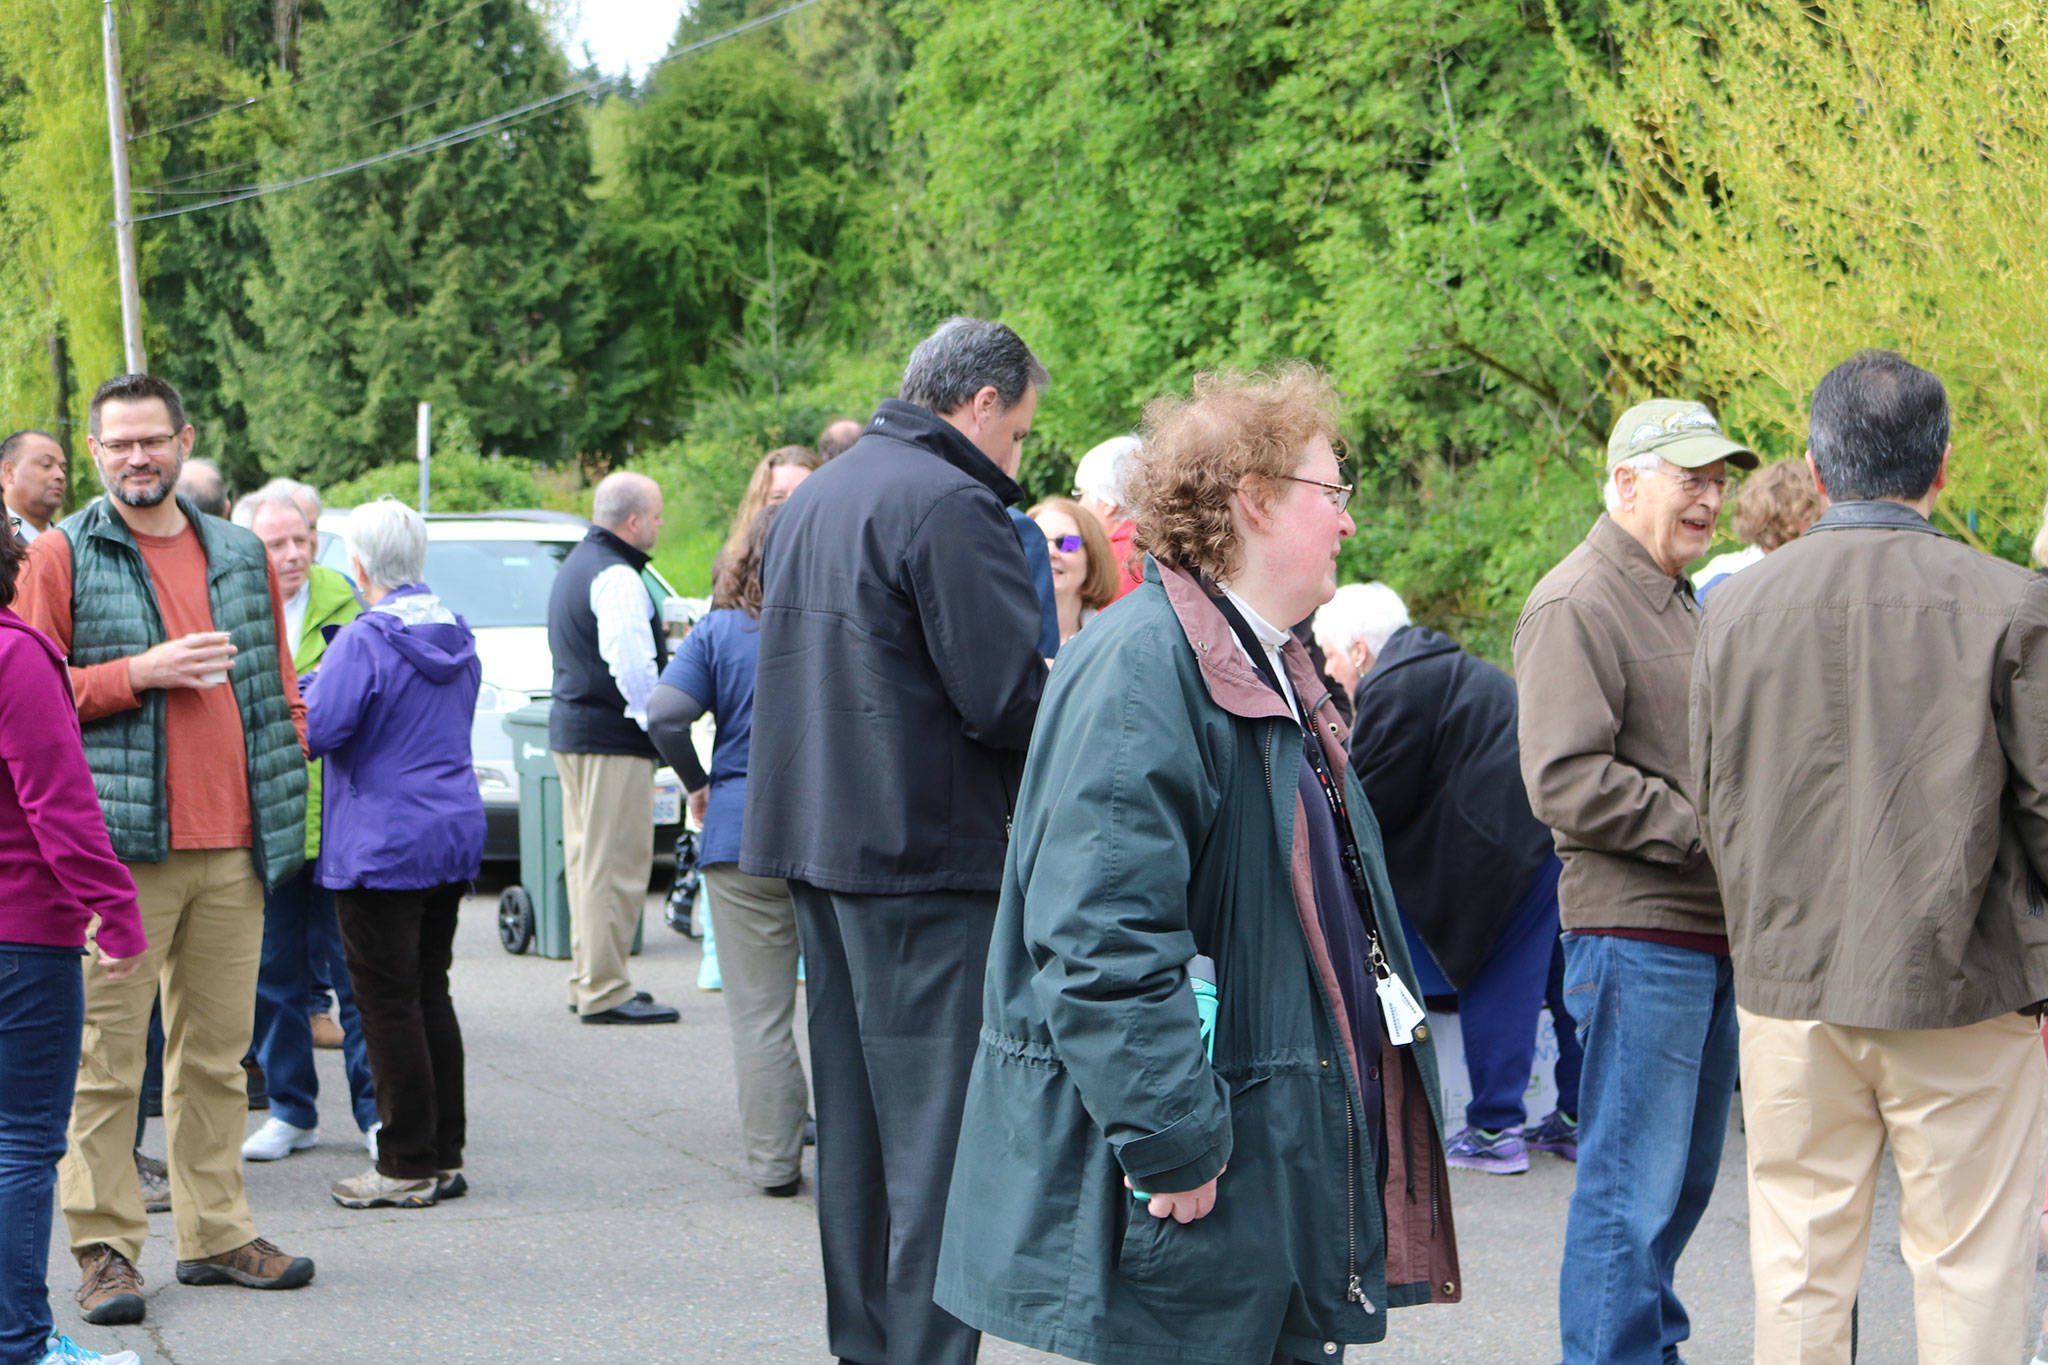 Attendees enjoy a continental breakfast provided by the Friends of the North Creek Forest ahead of the ribbon-cutting ceremony. CATHERINE KRUMMEY / Bothell Reporter